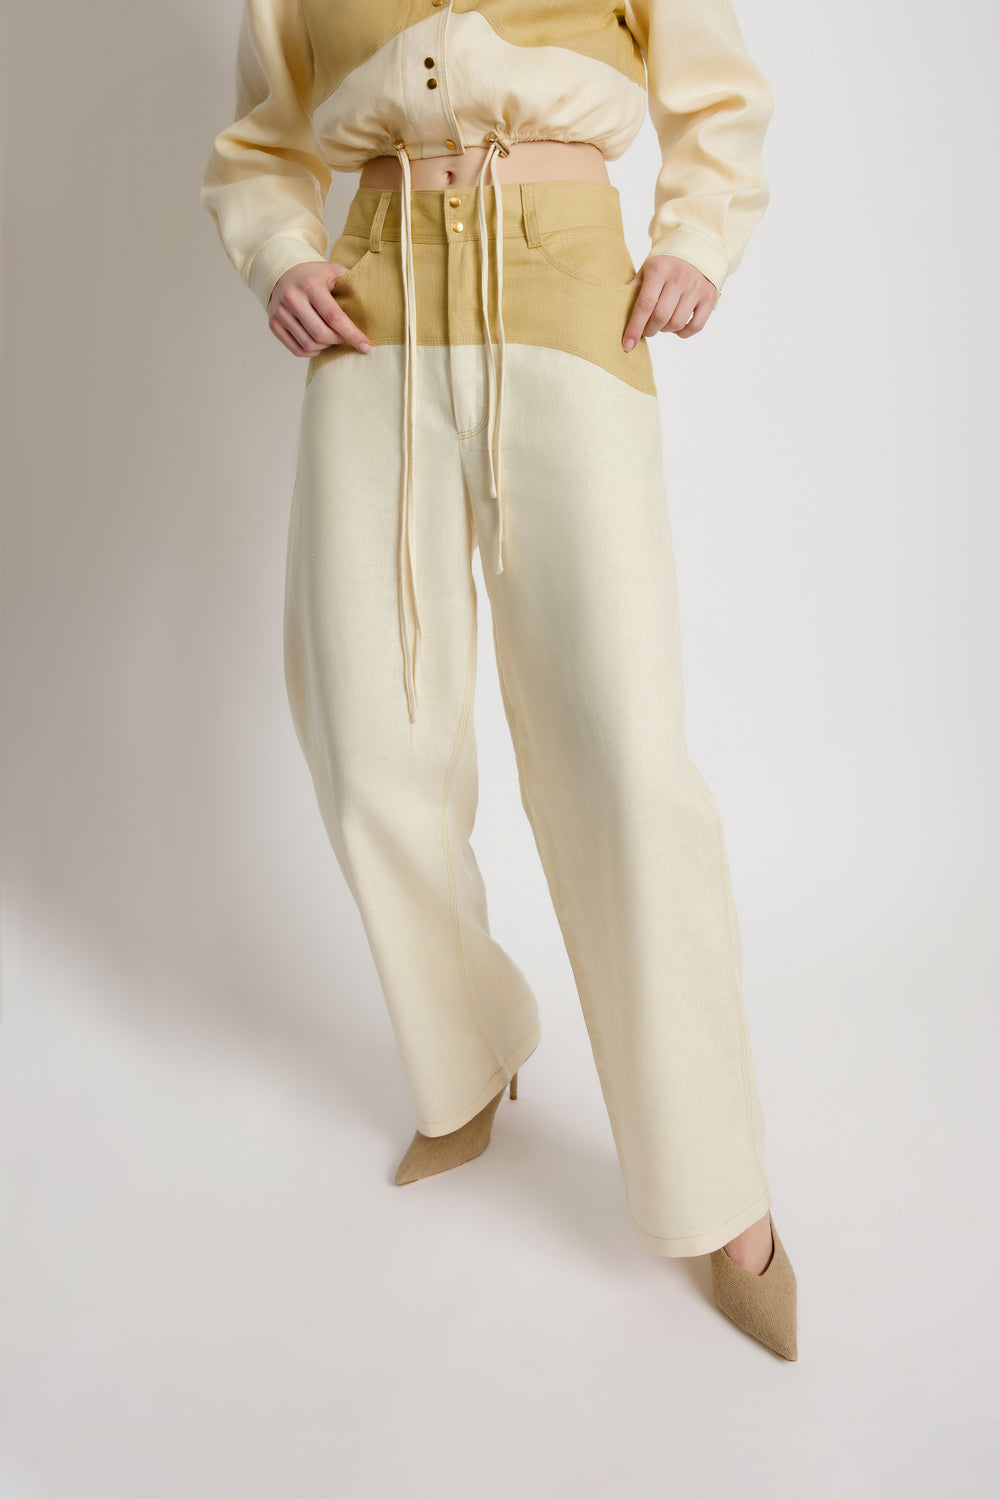 Two Tone Pant - Leaf Green and Pear | Sunset Lover